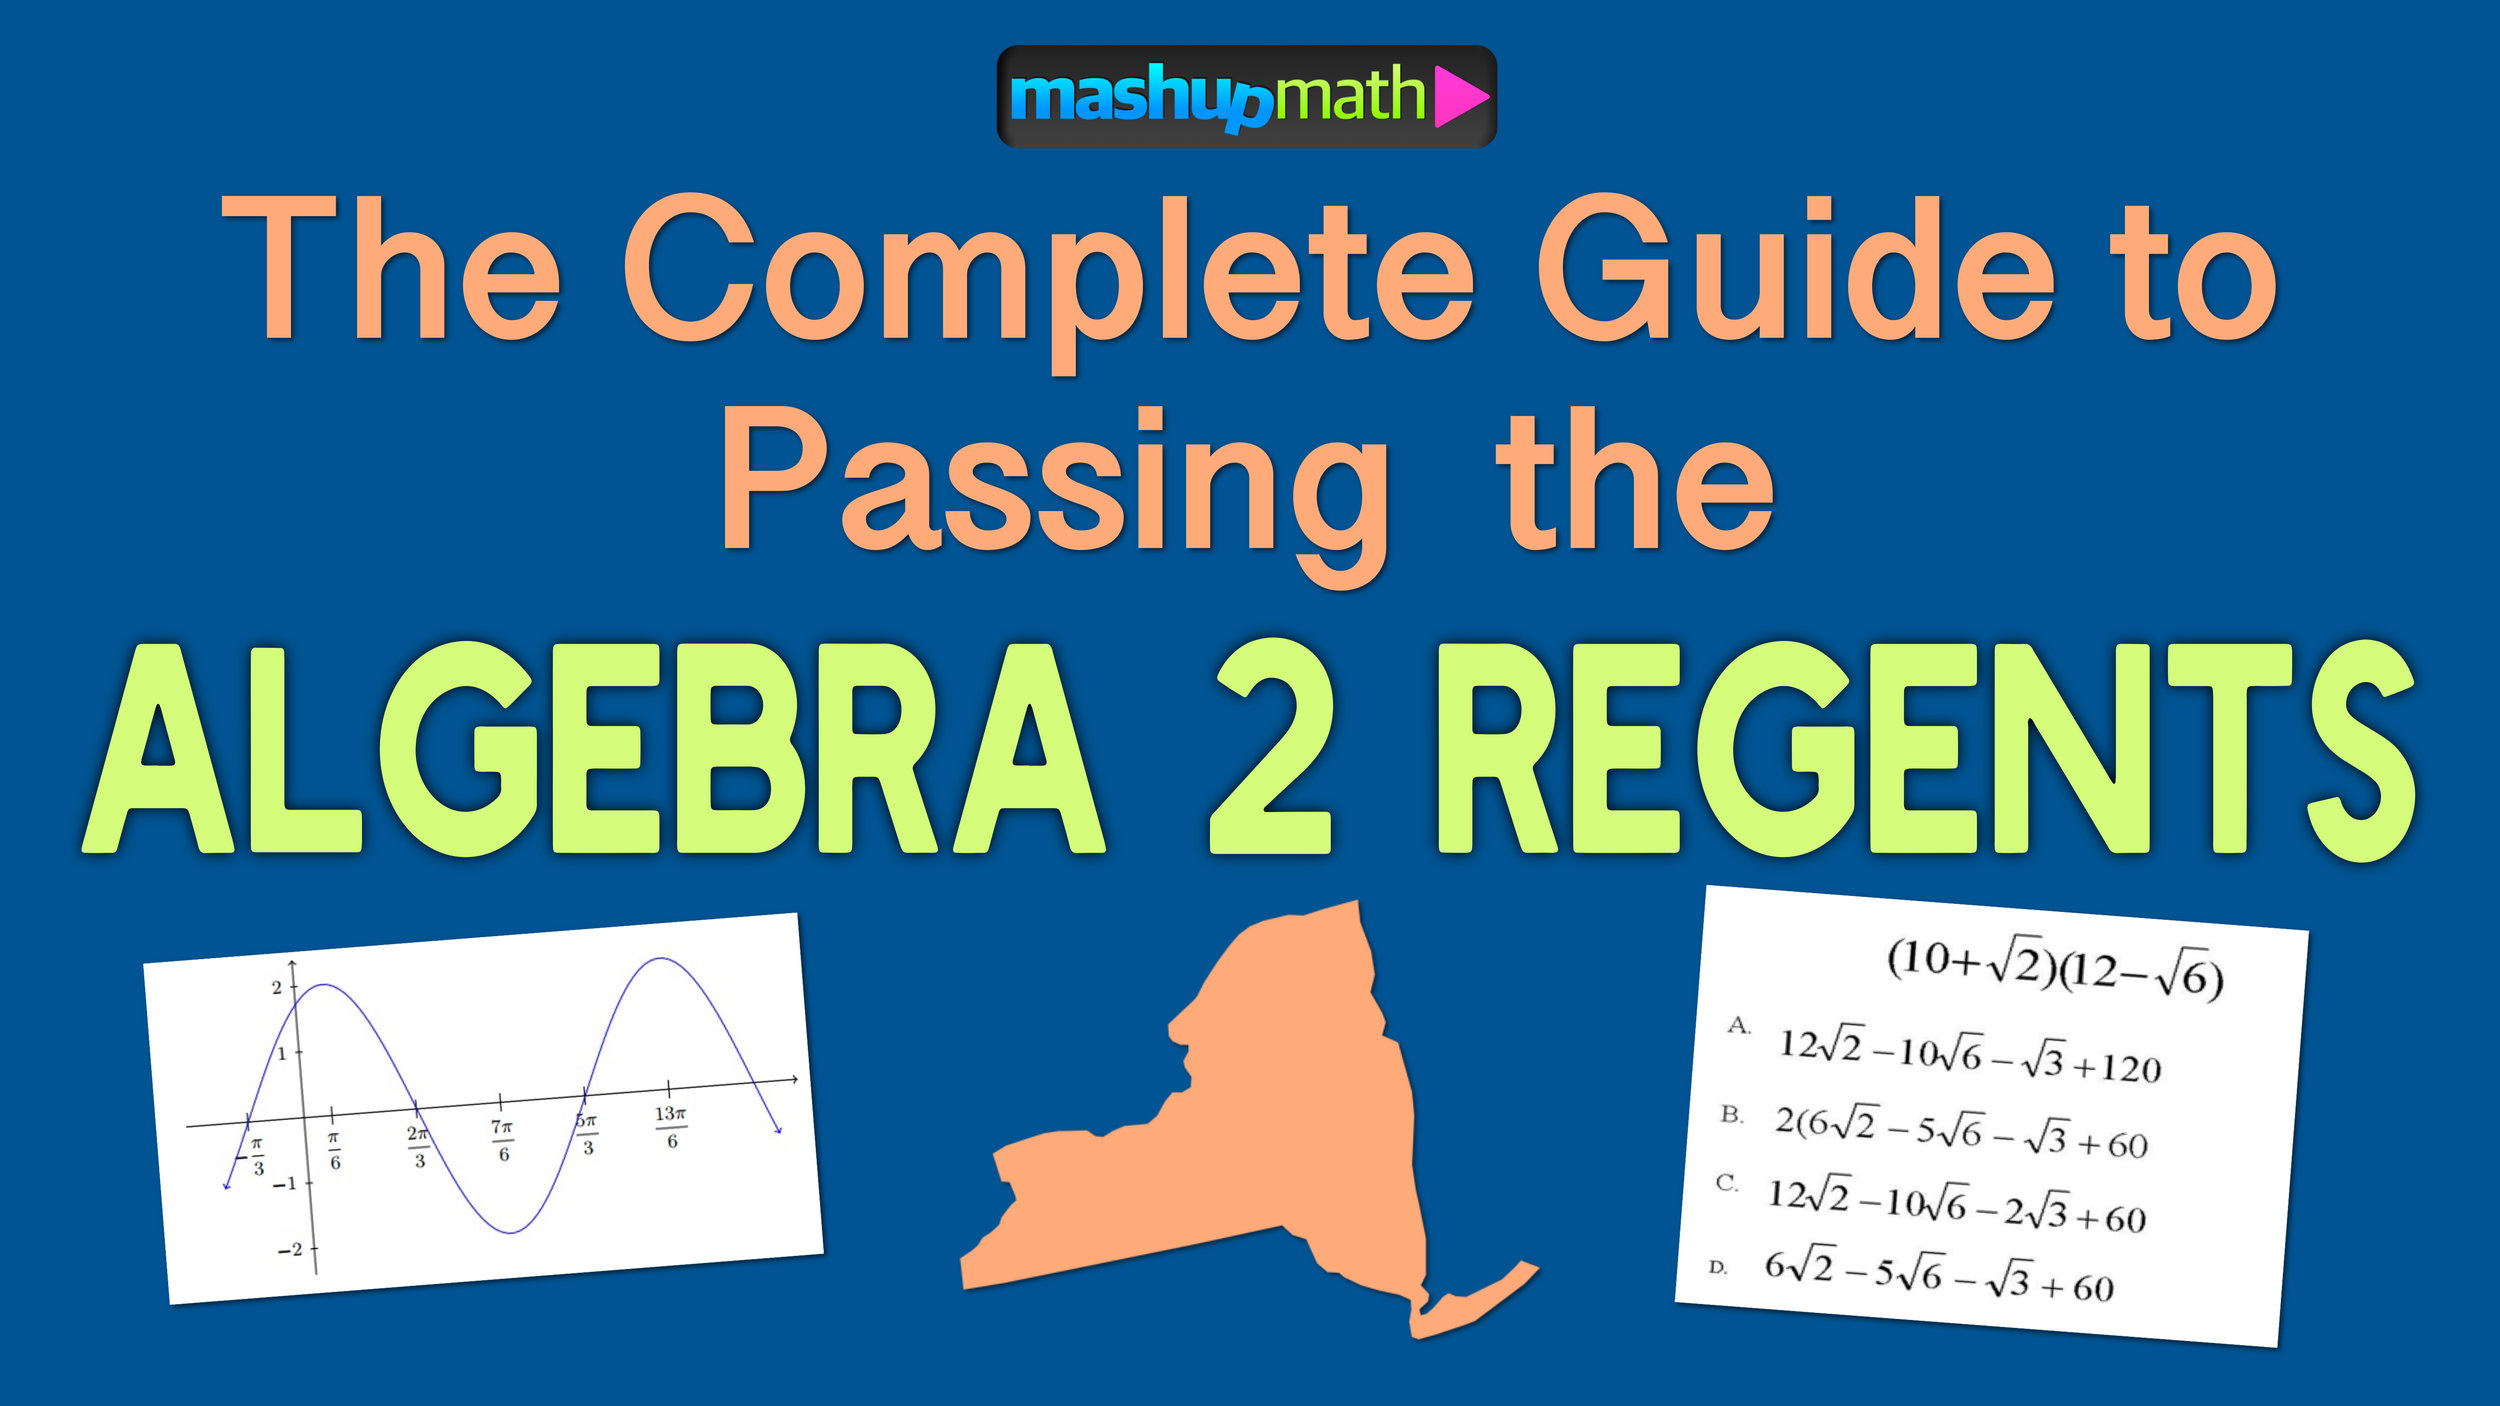 the-ultimate-guide-to-passing-the-algebra-2-regents-exam-mashup-math